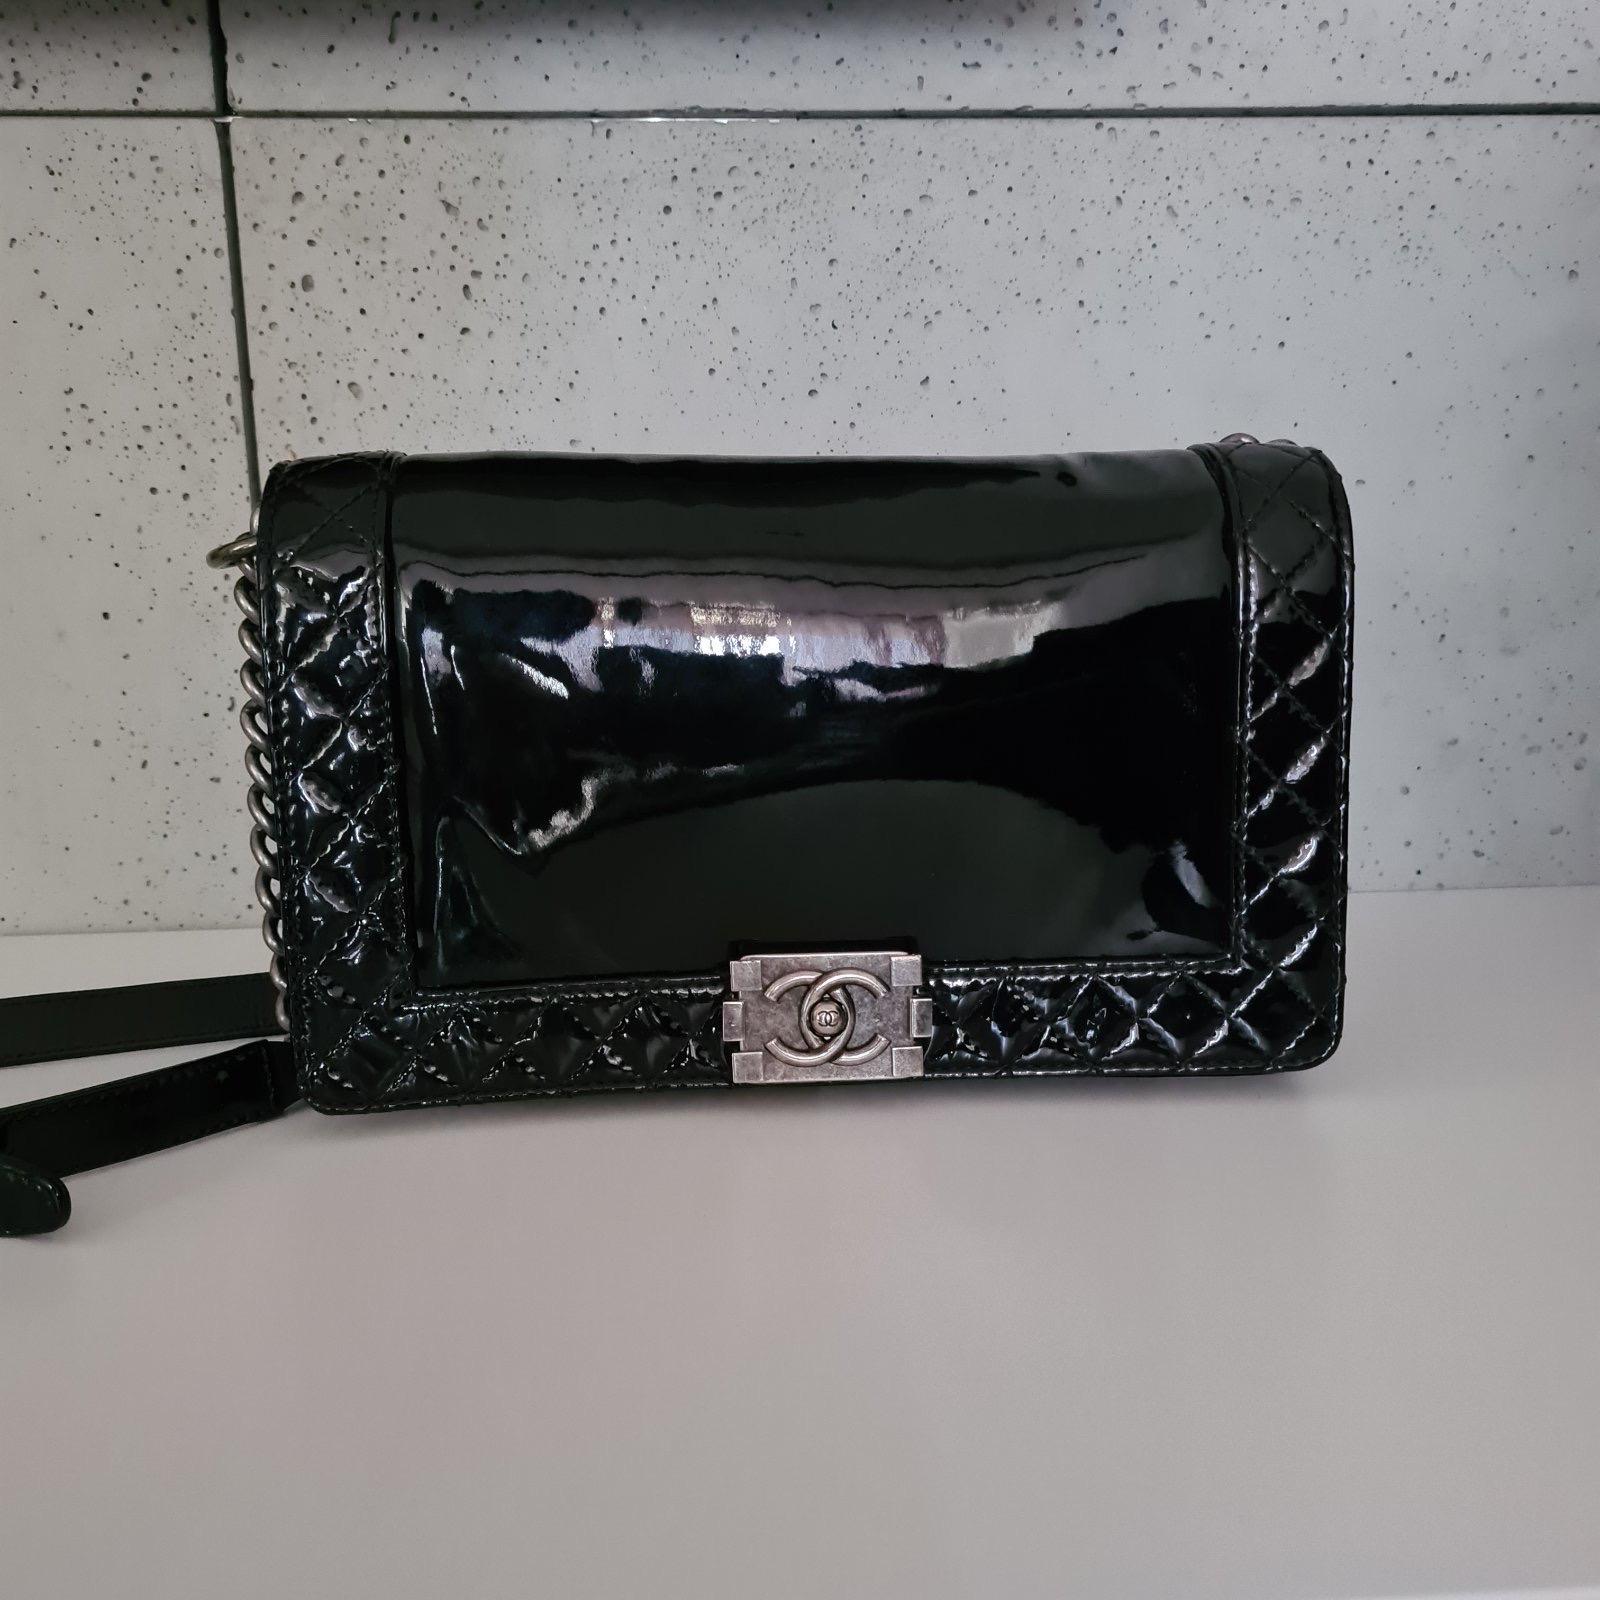 This particular bag is the New Medium size of the collection and  features a long antique Ruthenium chain-link strap with a leather pad that can be used as a long strap or looped around as a shoulder bag.

Sz.28*16*9 cm

Very good condition, but on